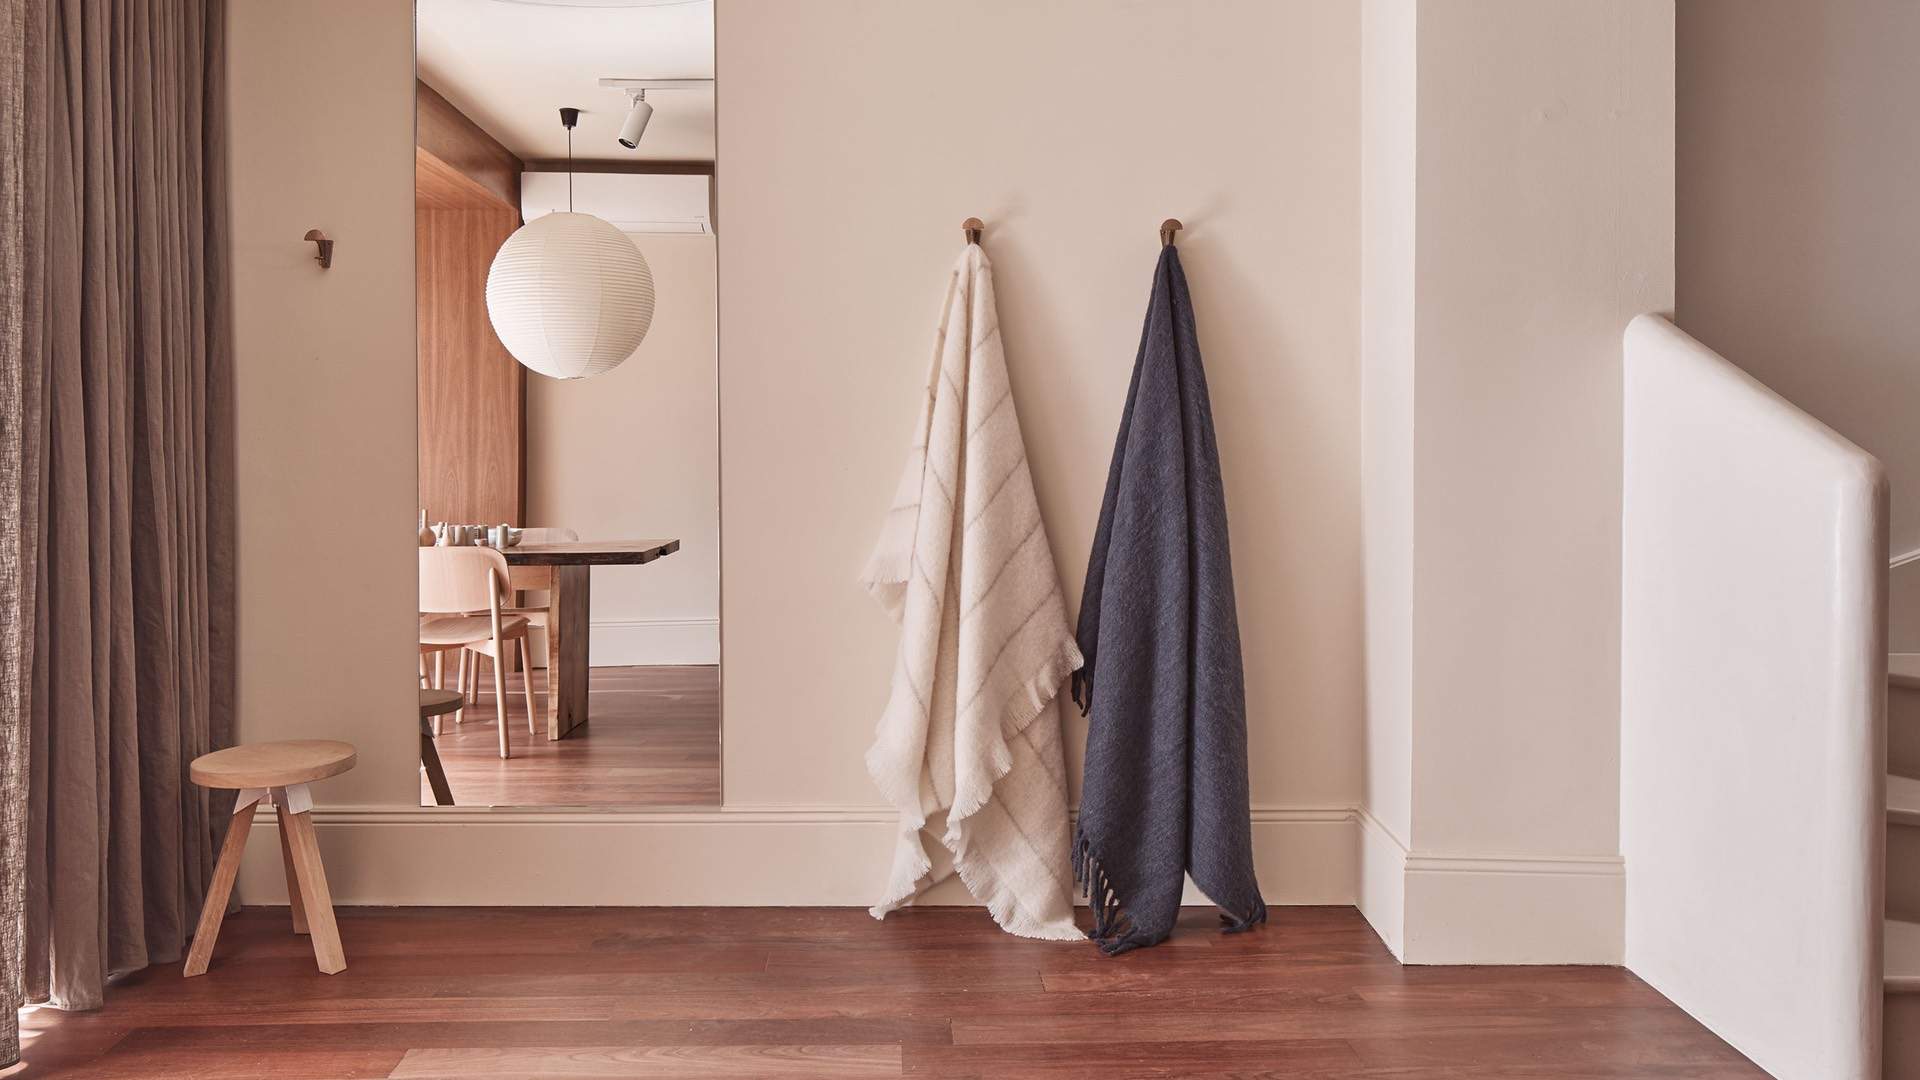 Luxury Homewares Label In Bed Has Just Opened Its First Bricks-and-Mortar Store in Sydney